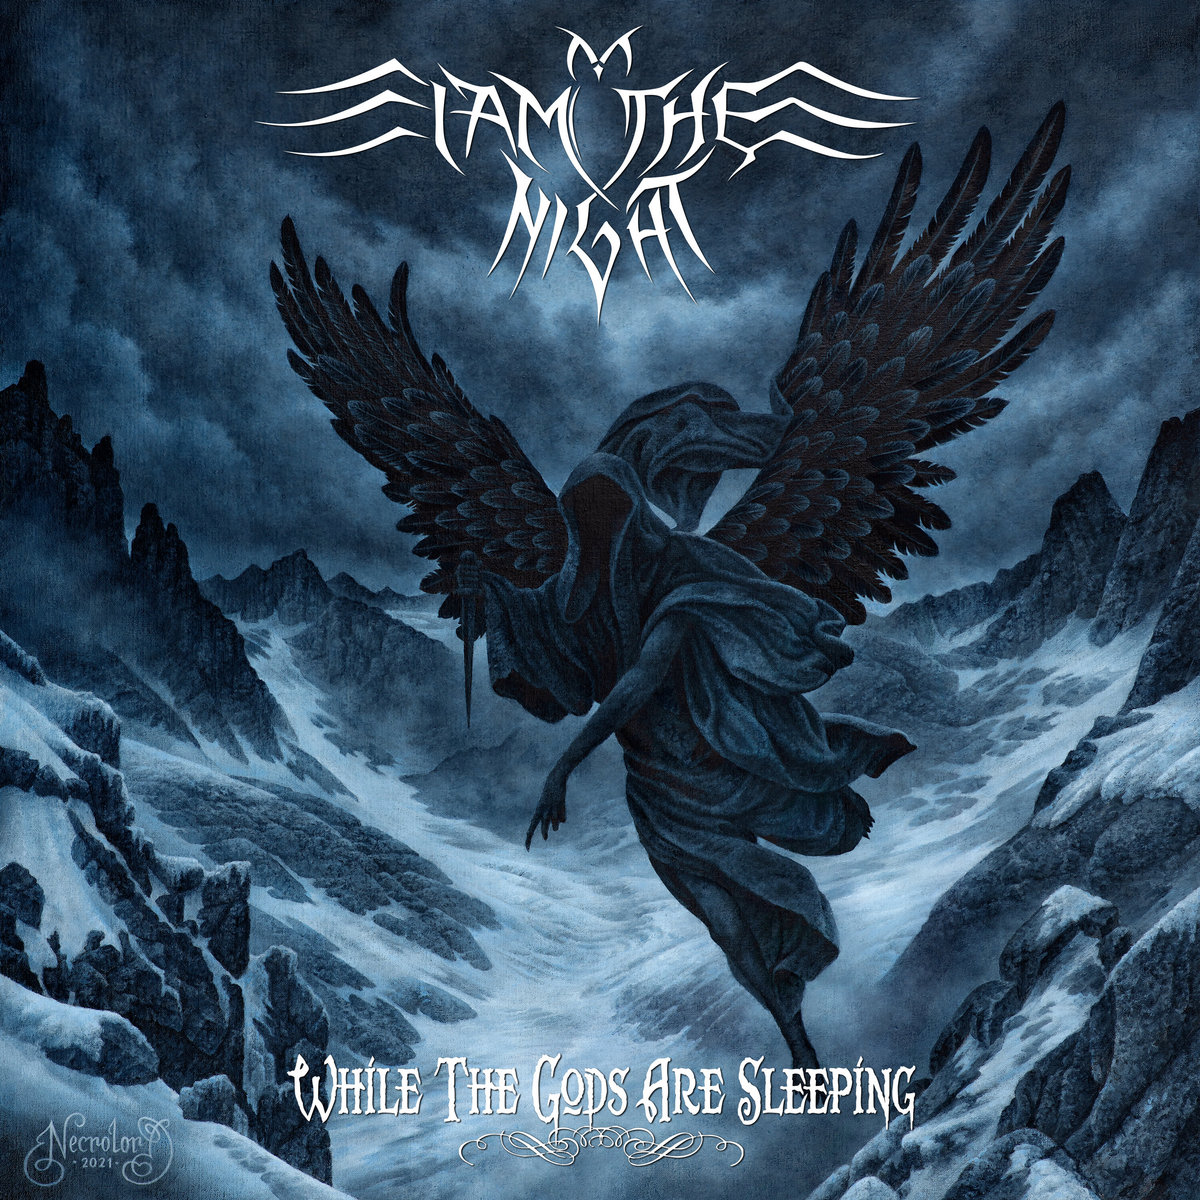 i am the night – while the gods are sleeping